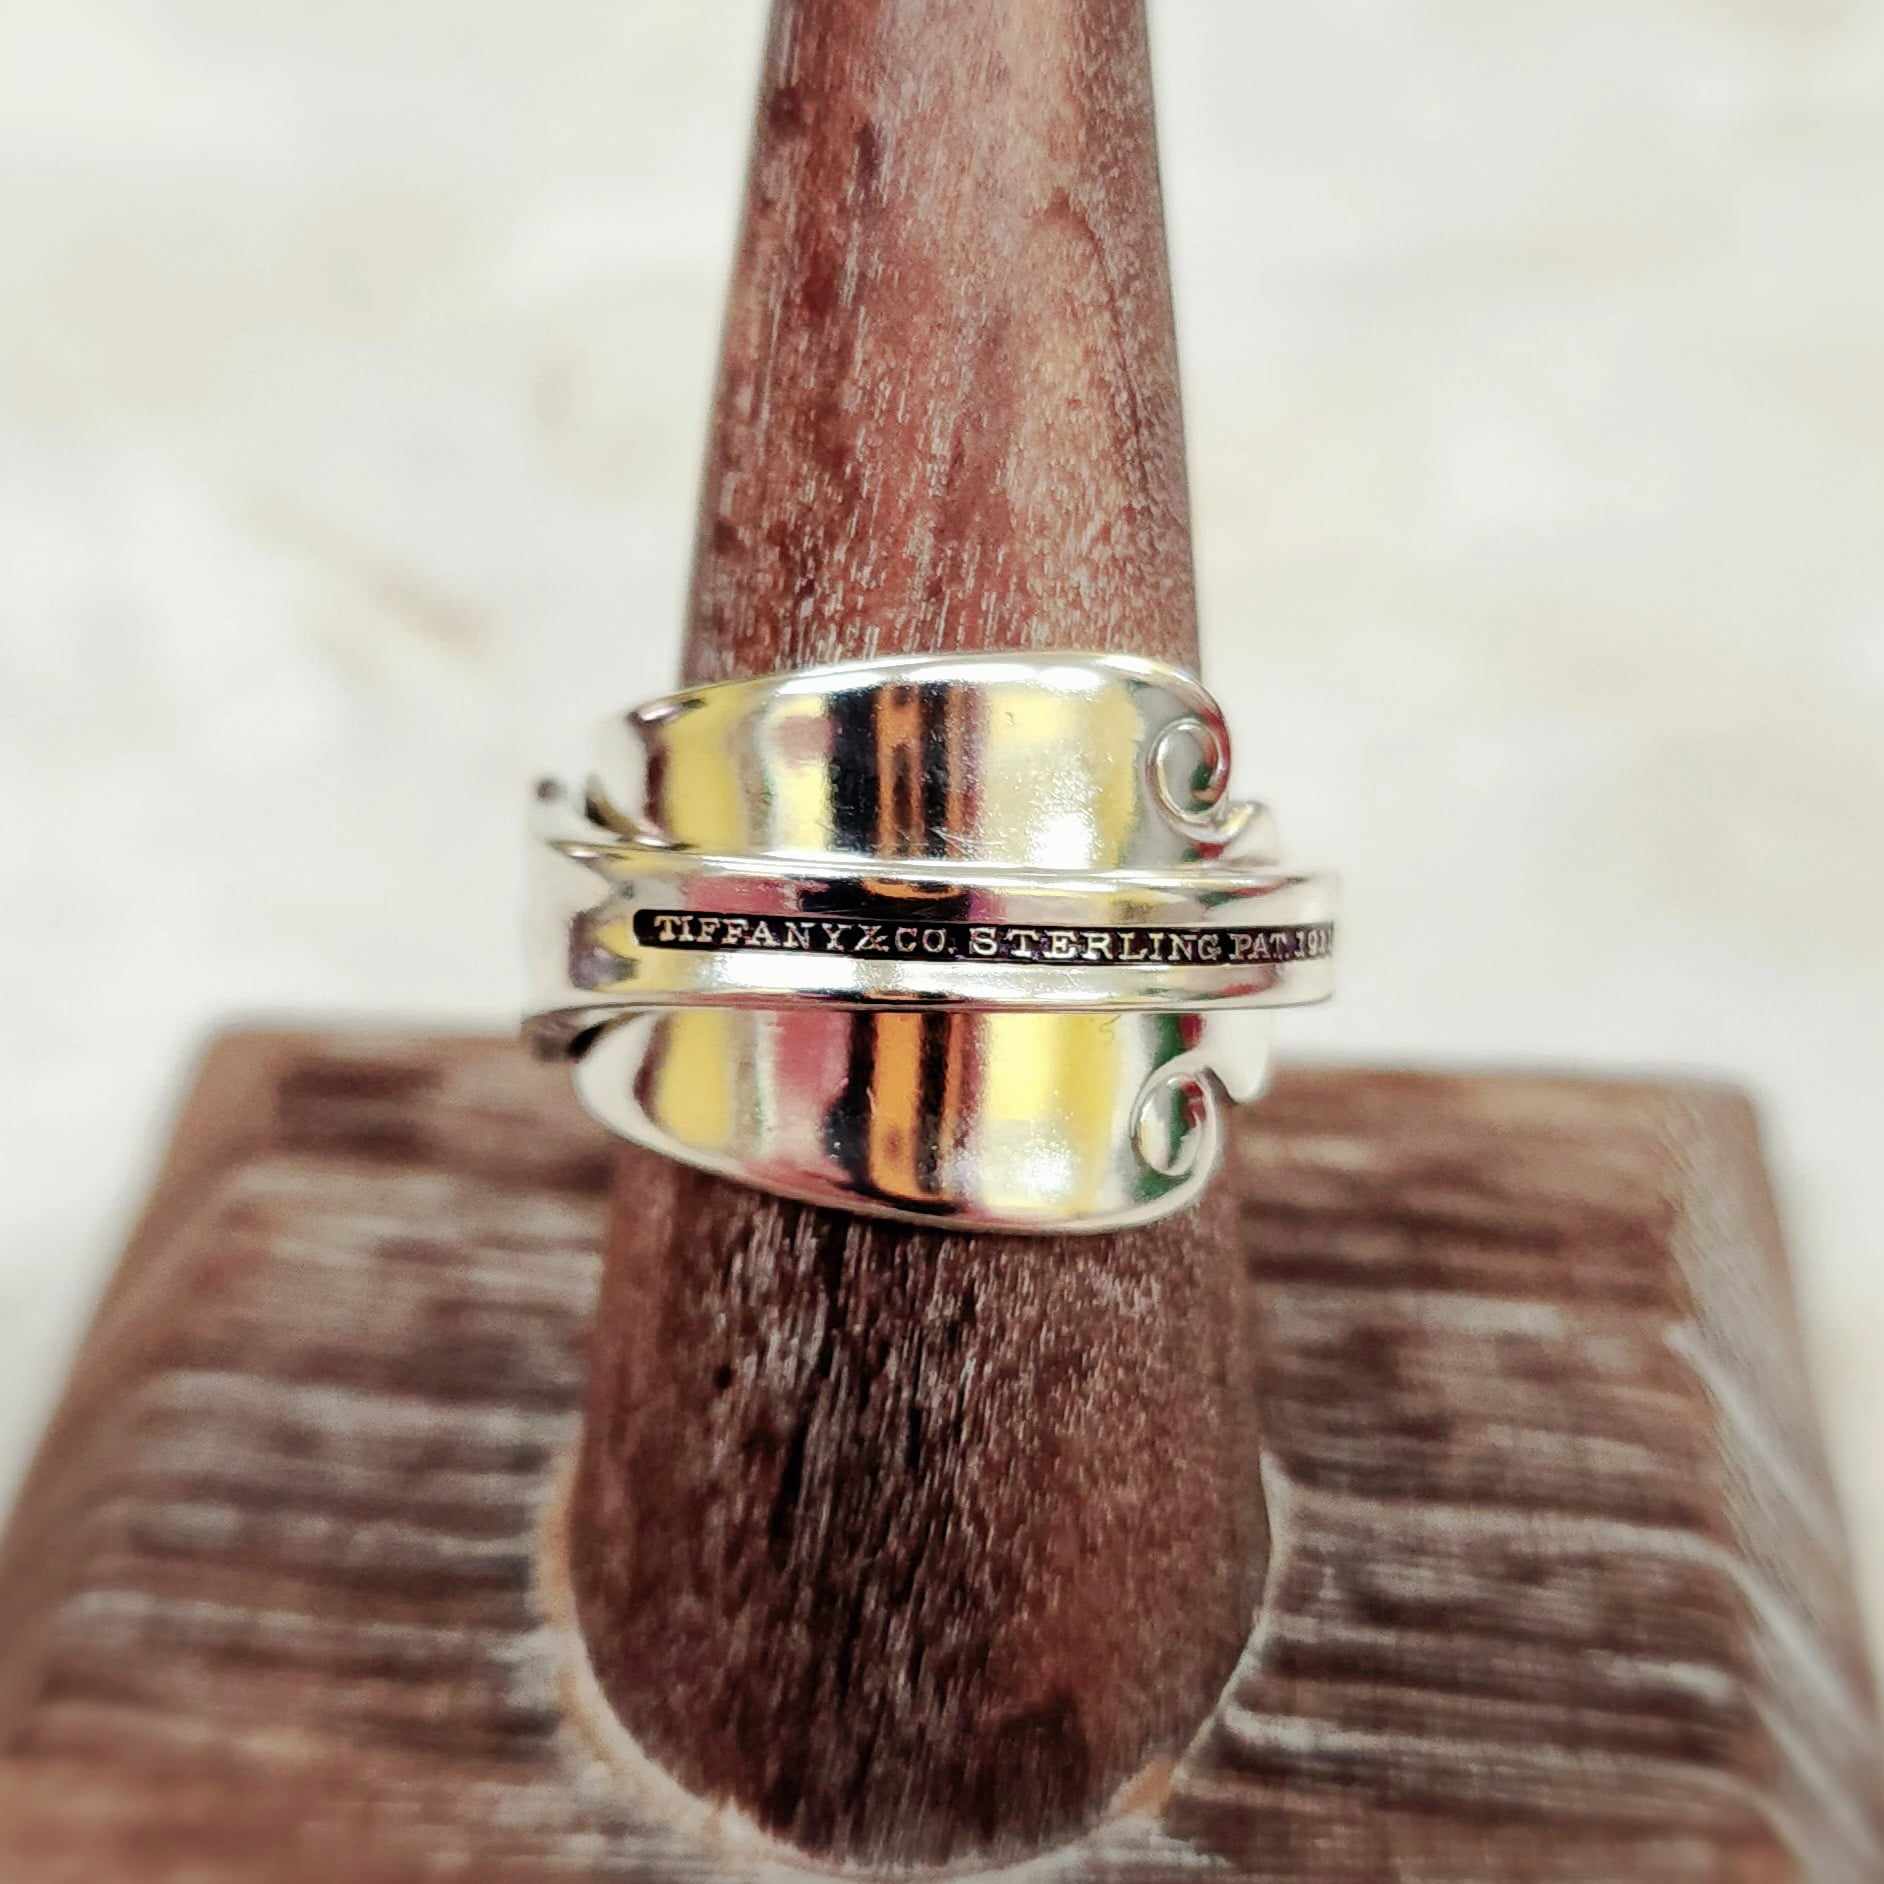 Tiffany & Co. sterling silver wrap over spoon ring 1911